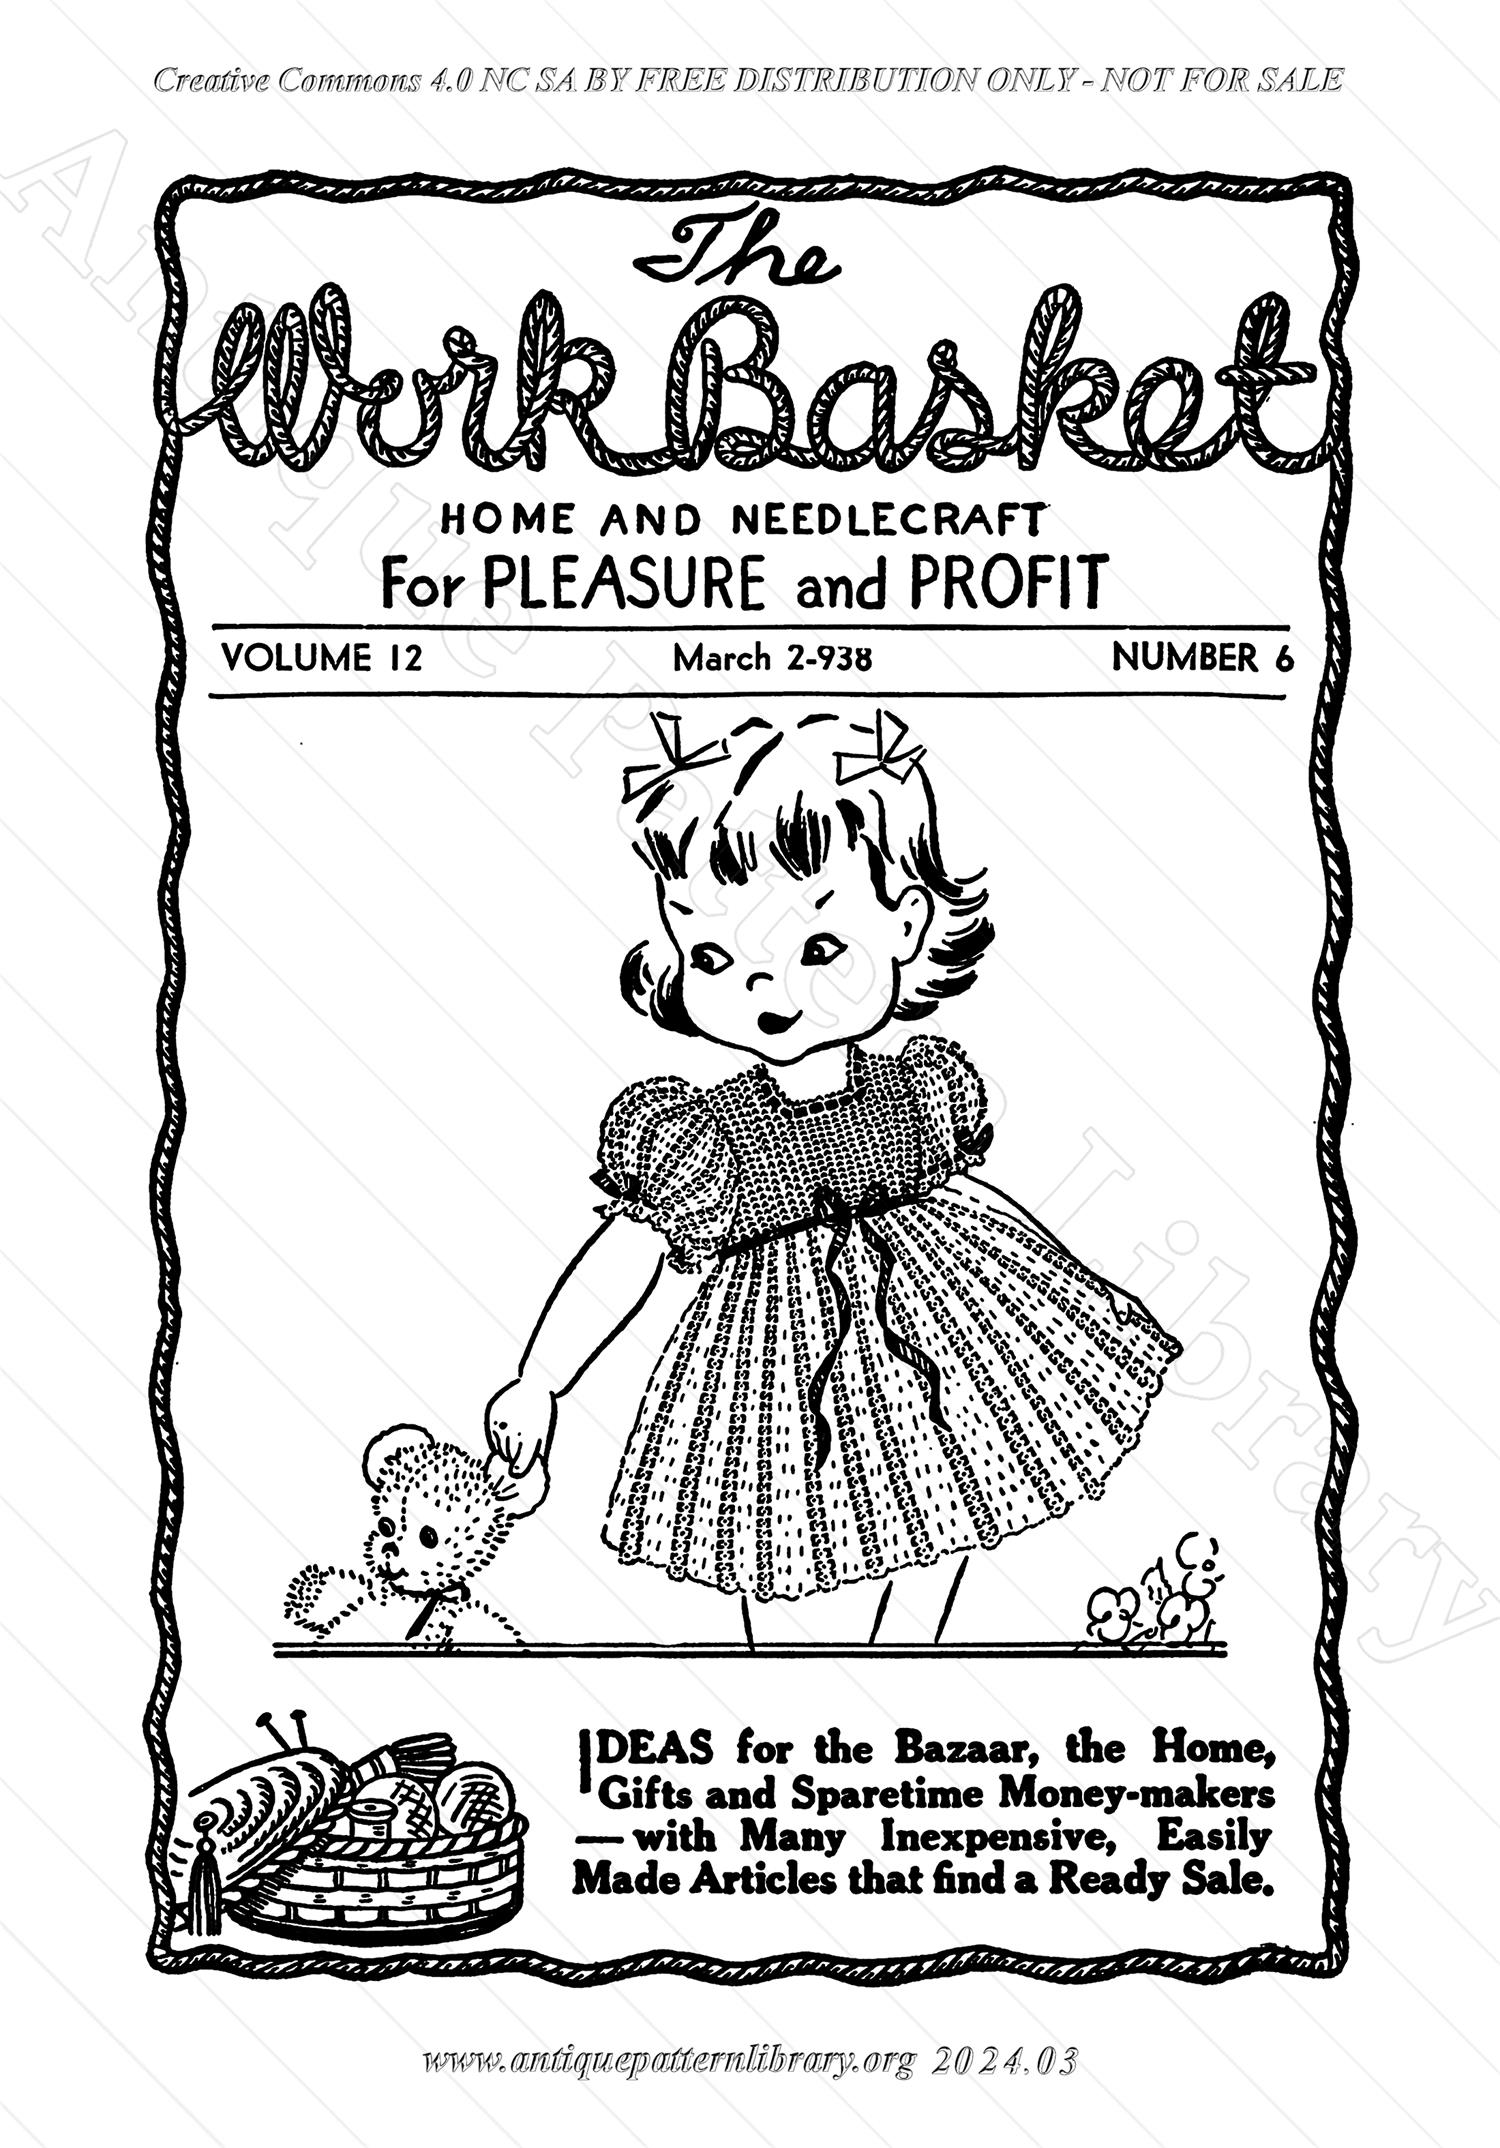 I-WB126 The Workbasket Volume 12 Number6 March 2-938